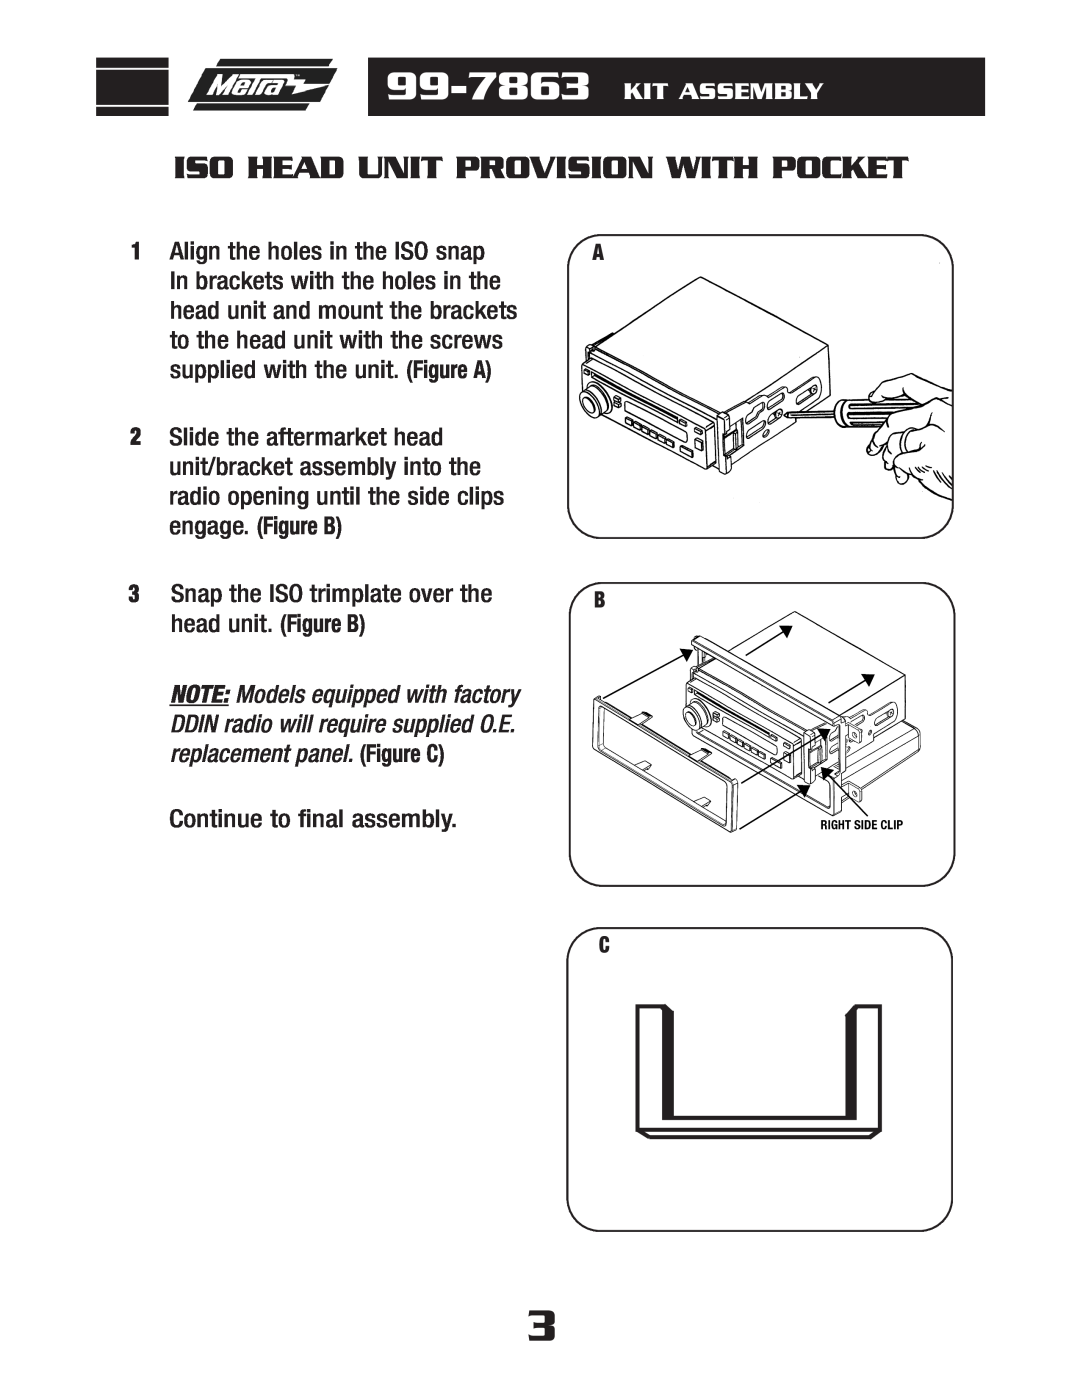 Metra Electronics 99-7863 installation instructions Iso Head Unit Provision With Pocket, Kit Assembly 